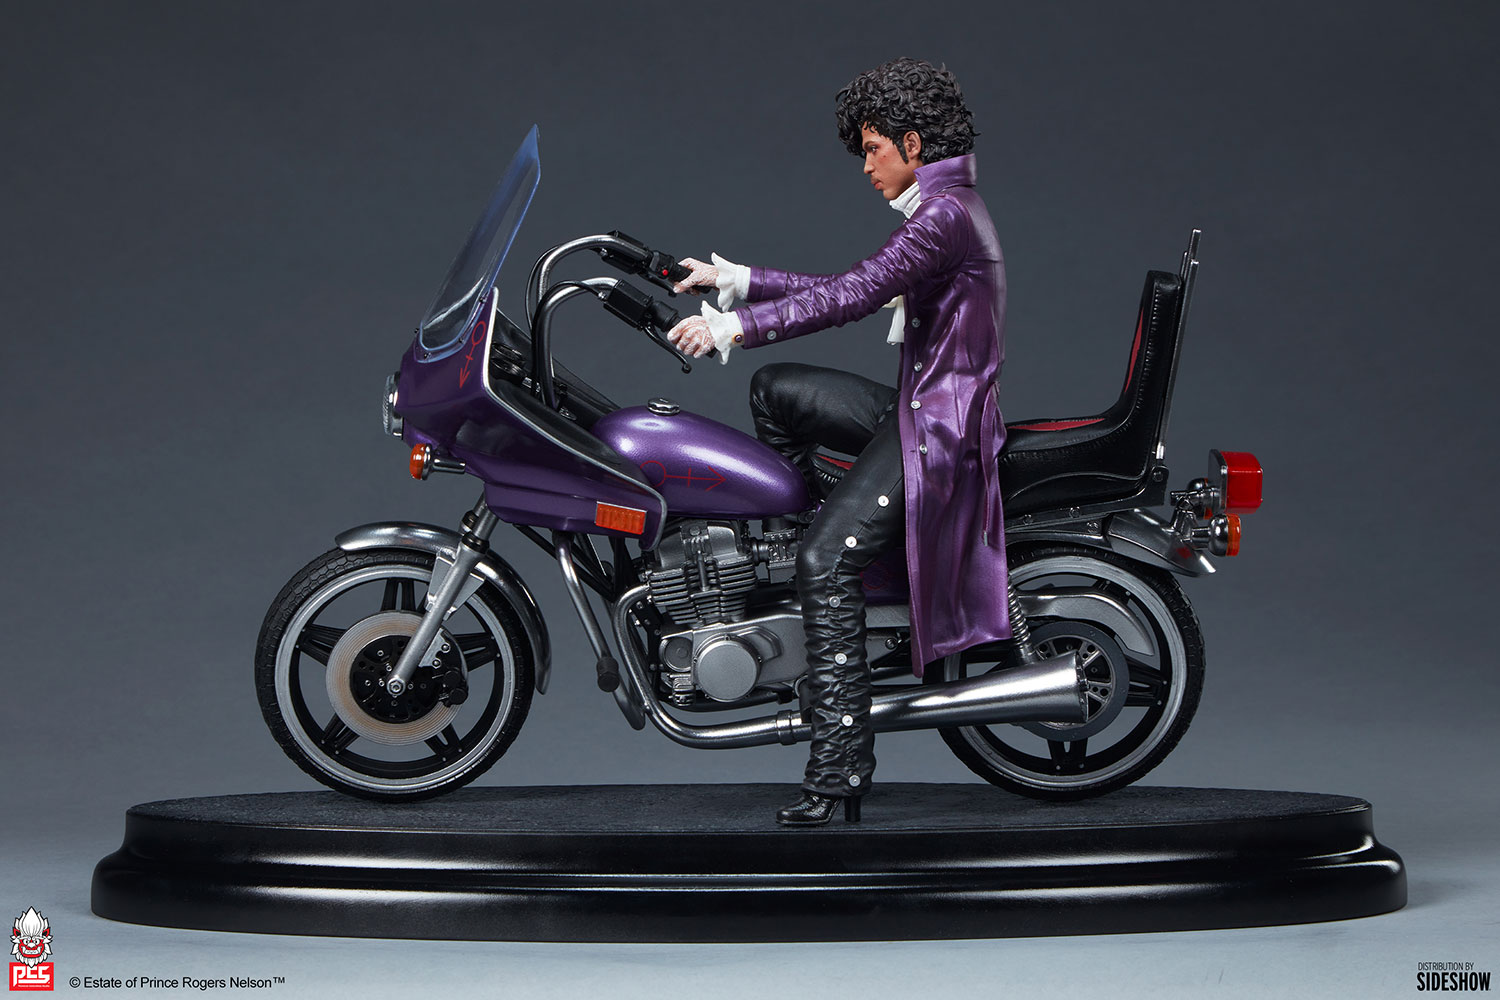 Prince's Purple Rain look, lovingly recreated as a deluxe statue.